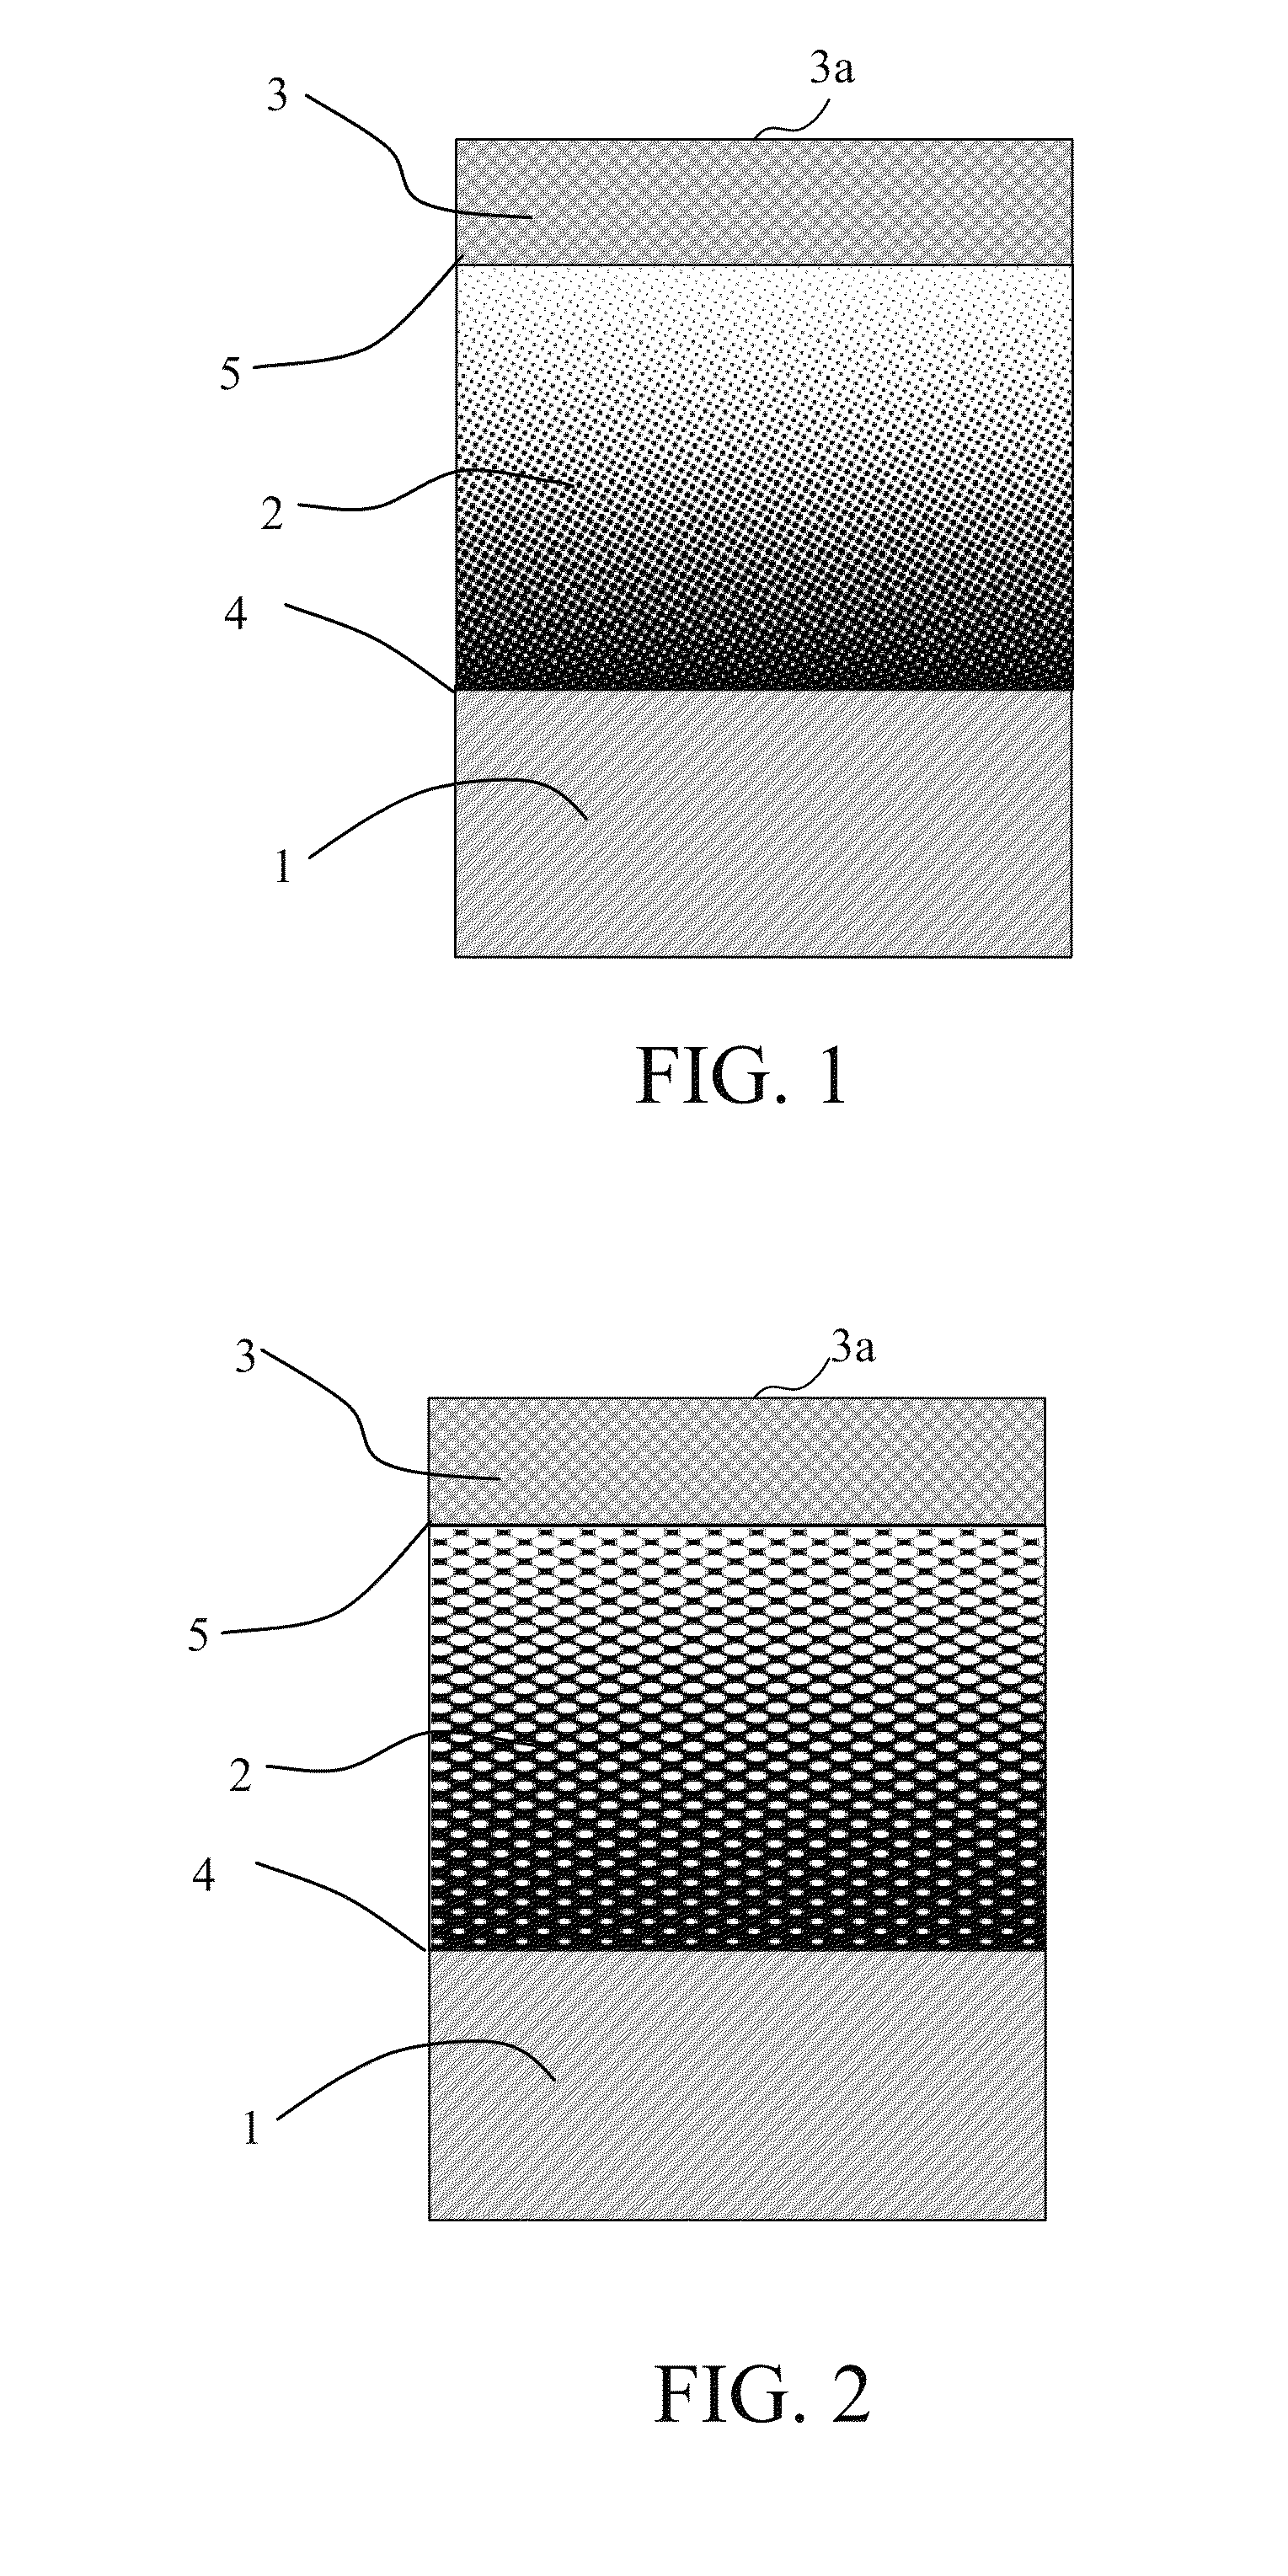 Anti-reflection structure with graded refractive index layer and optical apparatus including same